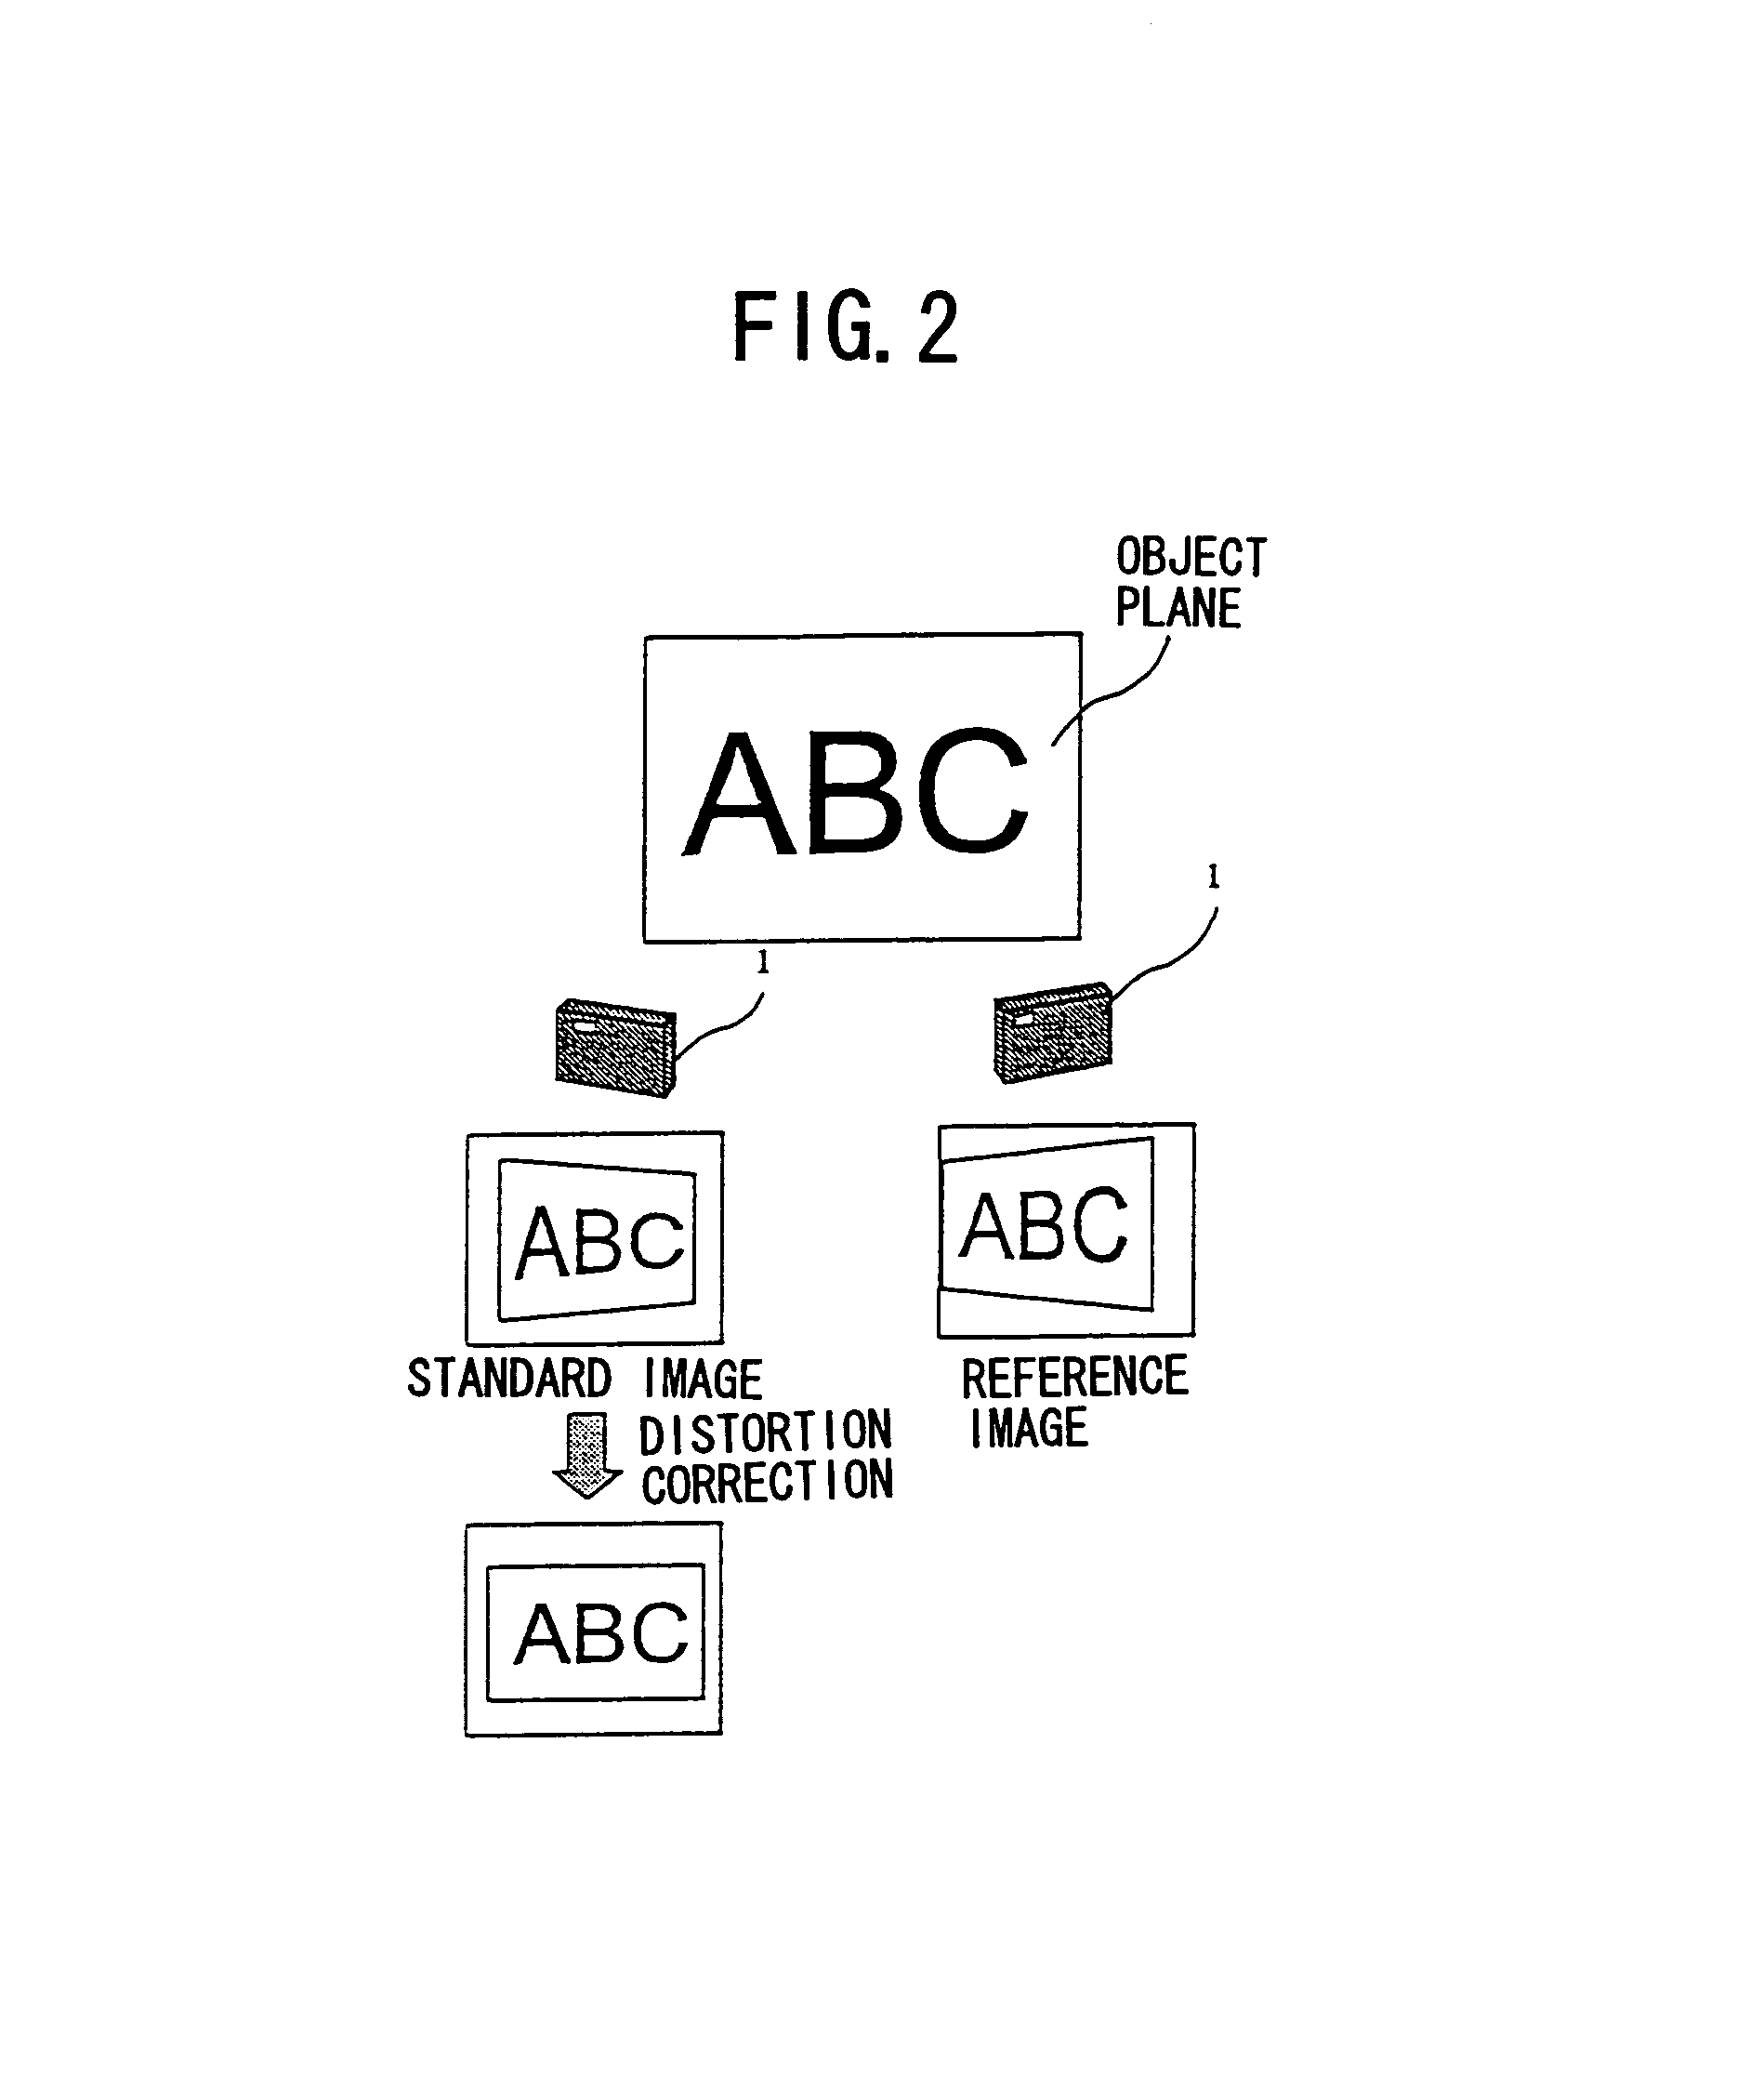 Image processing method and apparatus, digital camera, image processing system and computer readable medium